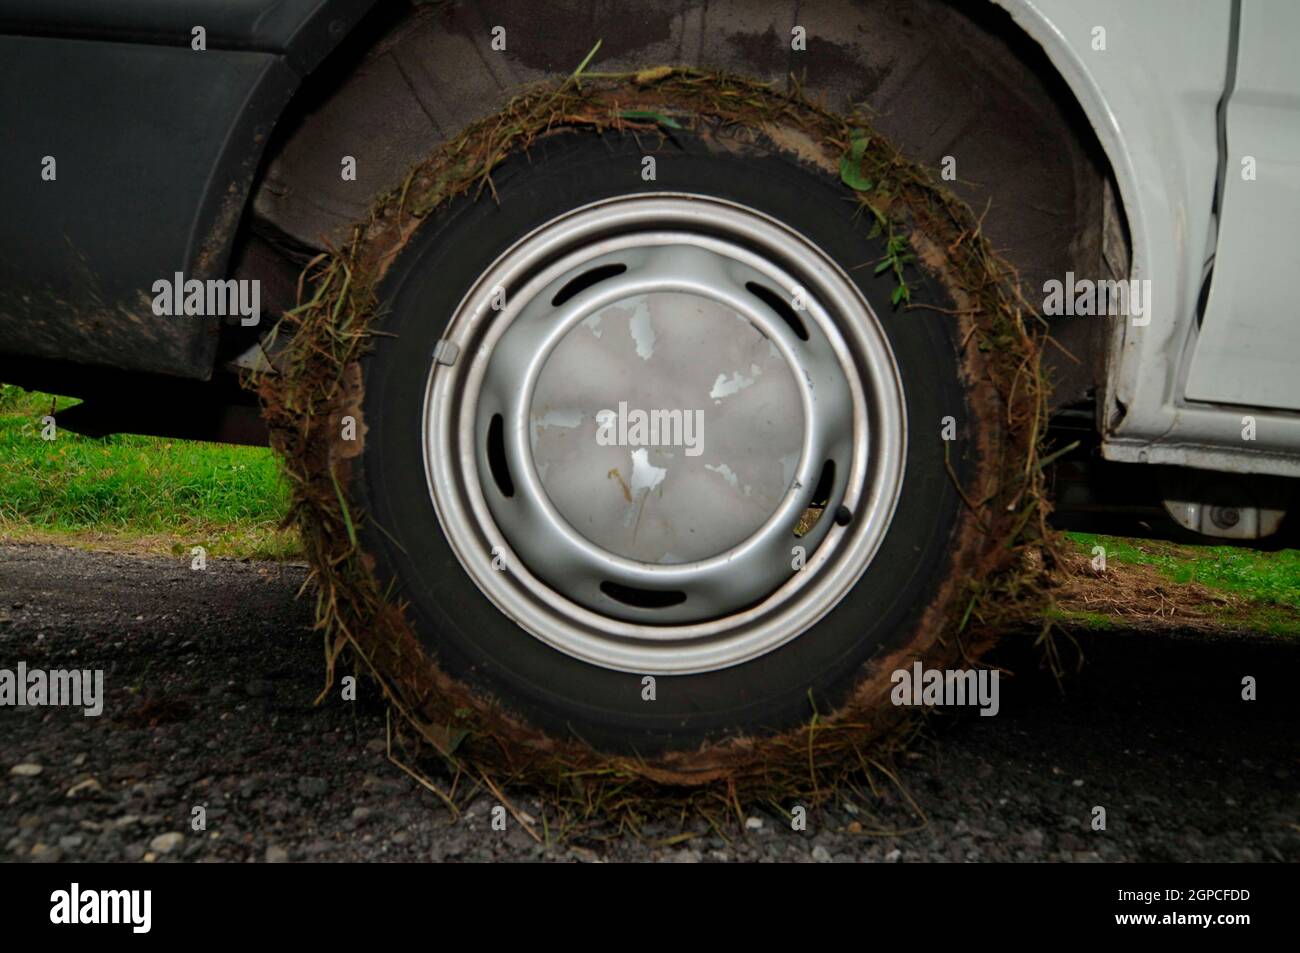 tire adhesion or tire grip, traffic safety on the road Stock Photo - Alamy